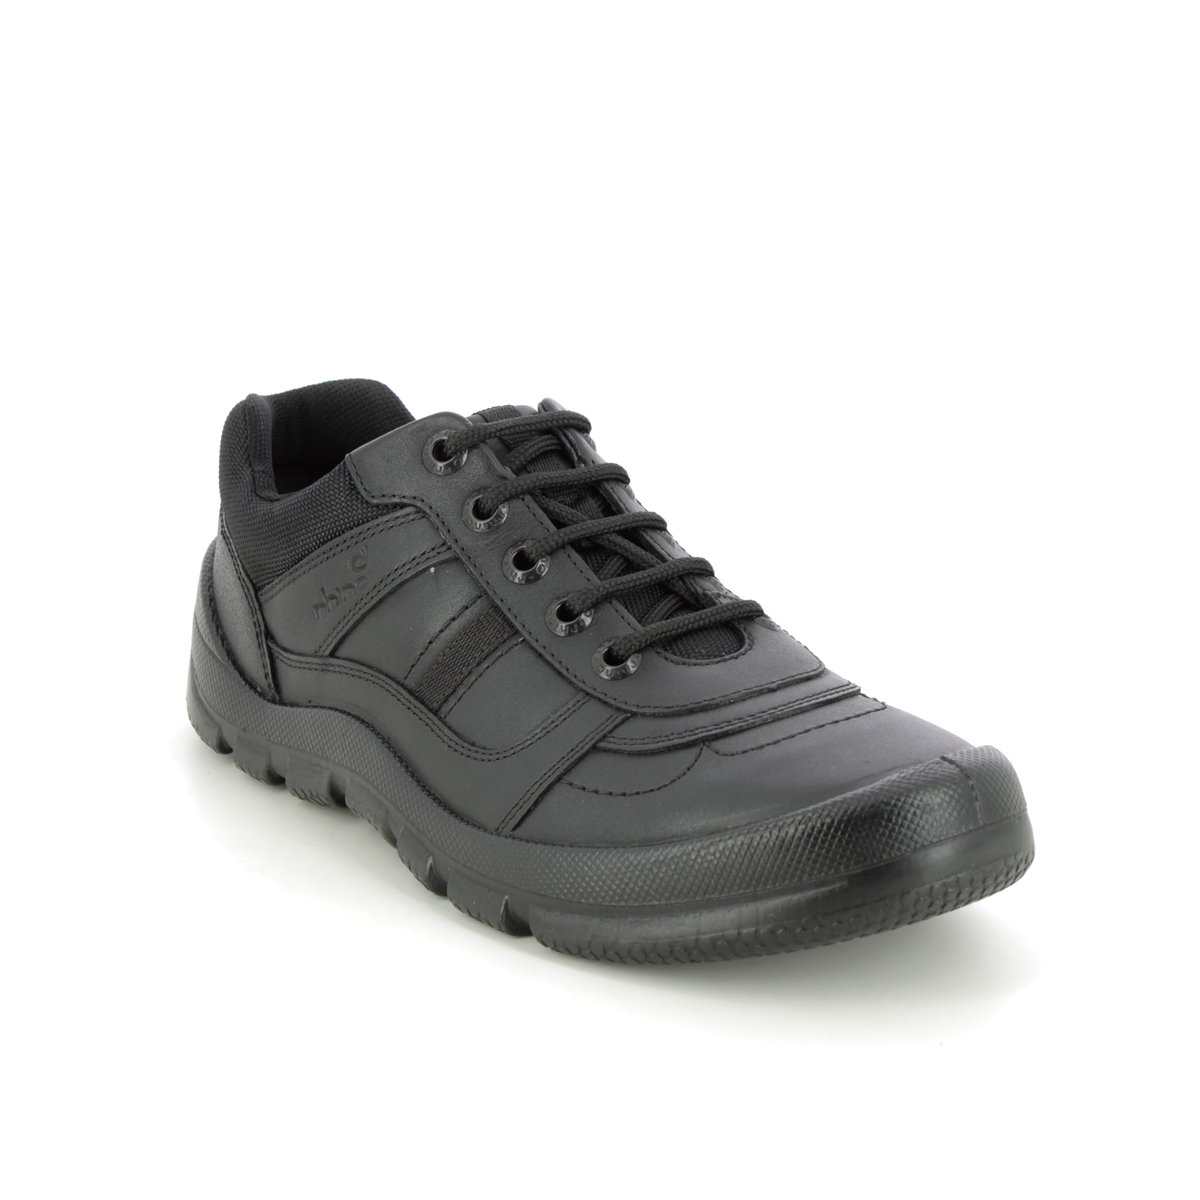 Start Rite - Rhino Warrior Lace In Black Leather 8238-76F In Size 4 In Plain Black Leather For School Boys Shoes  In Black Leather For kids